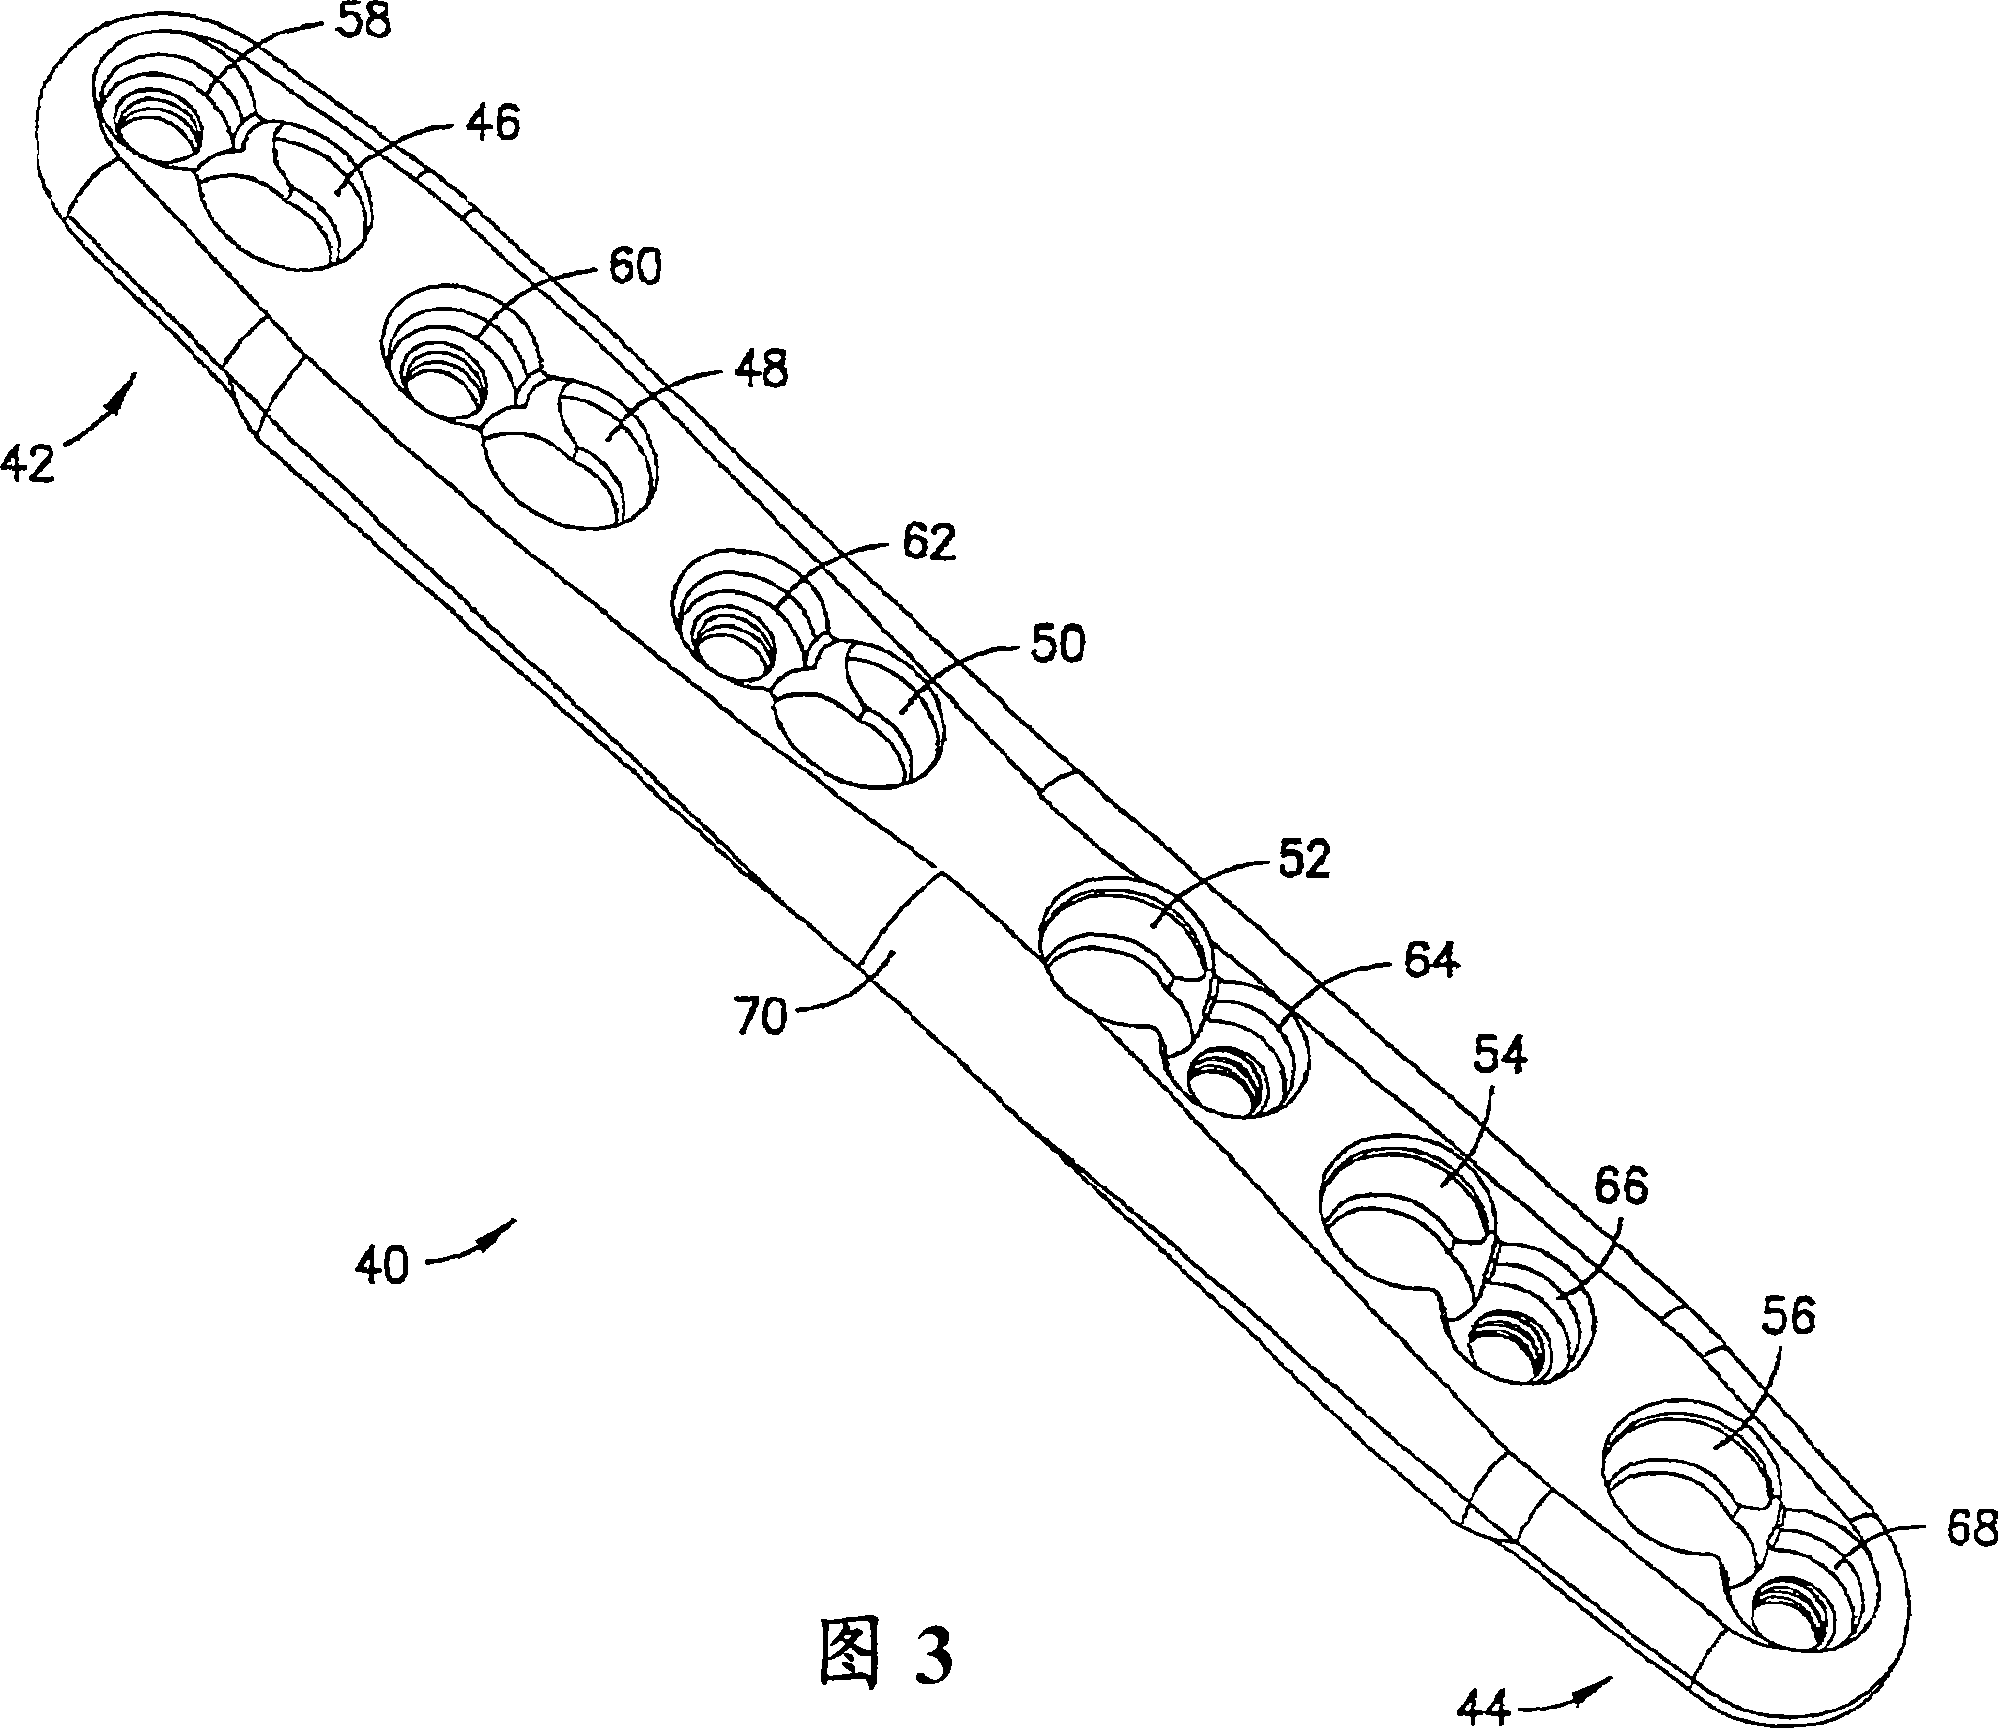 Modular fracture fixation plate system